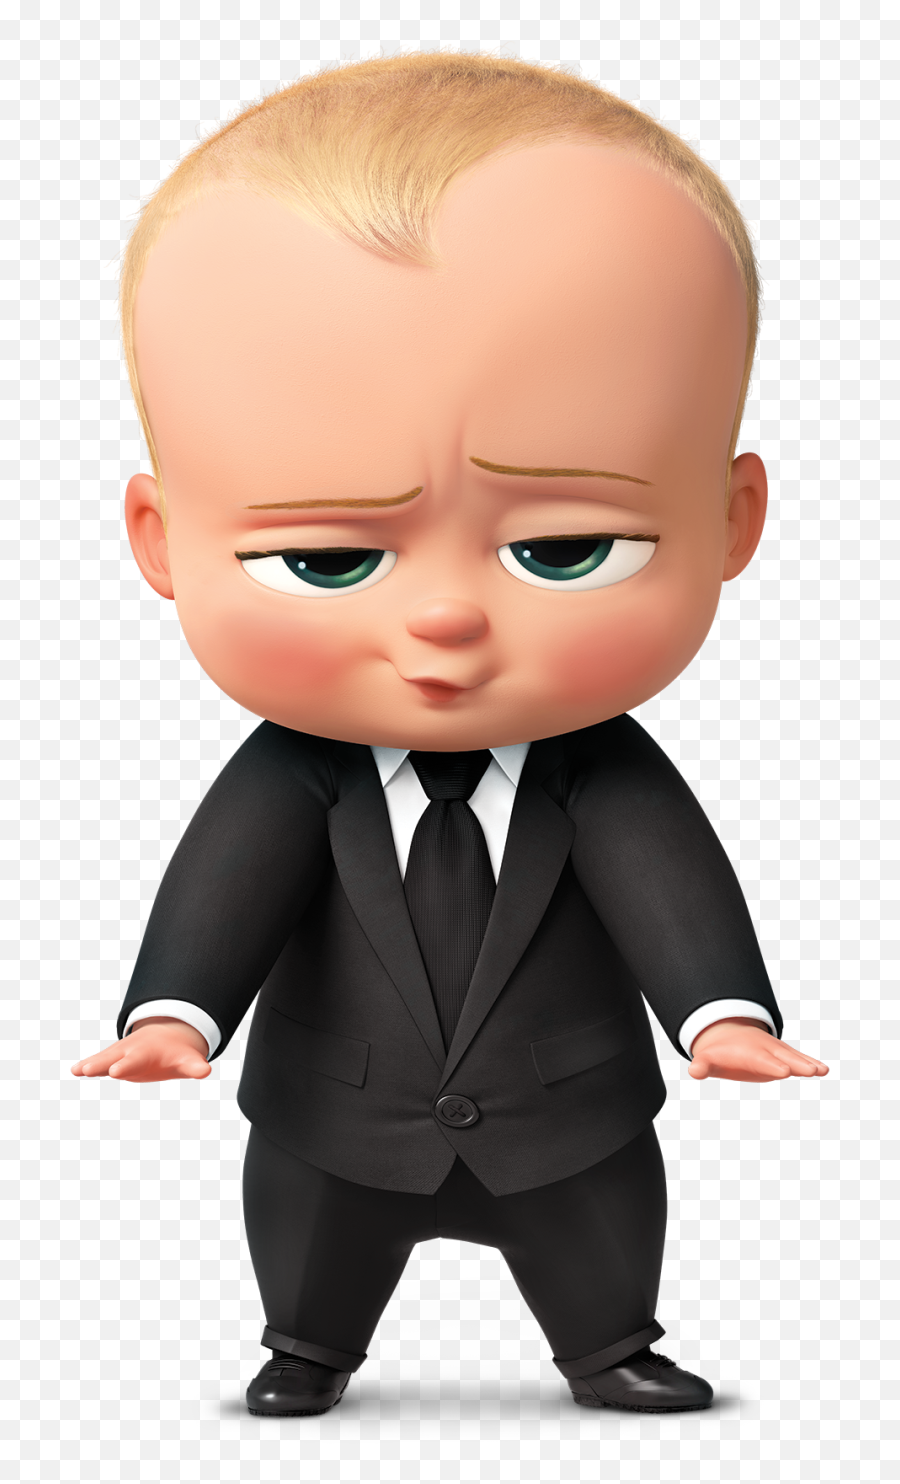 The Boss Baby Png Free Image - Boss Baby Outfit Boy,Boss Baby Png